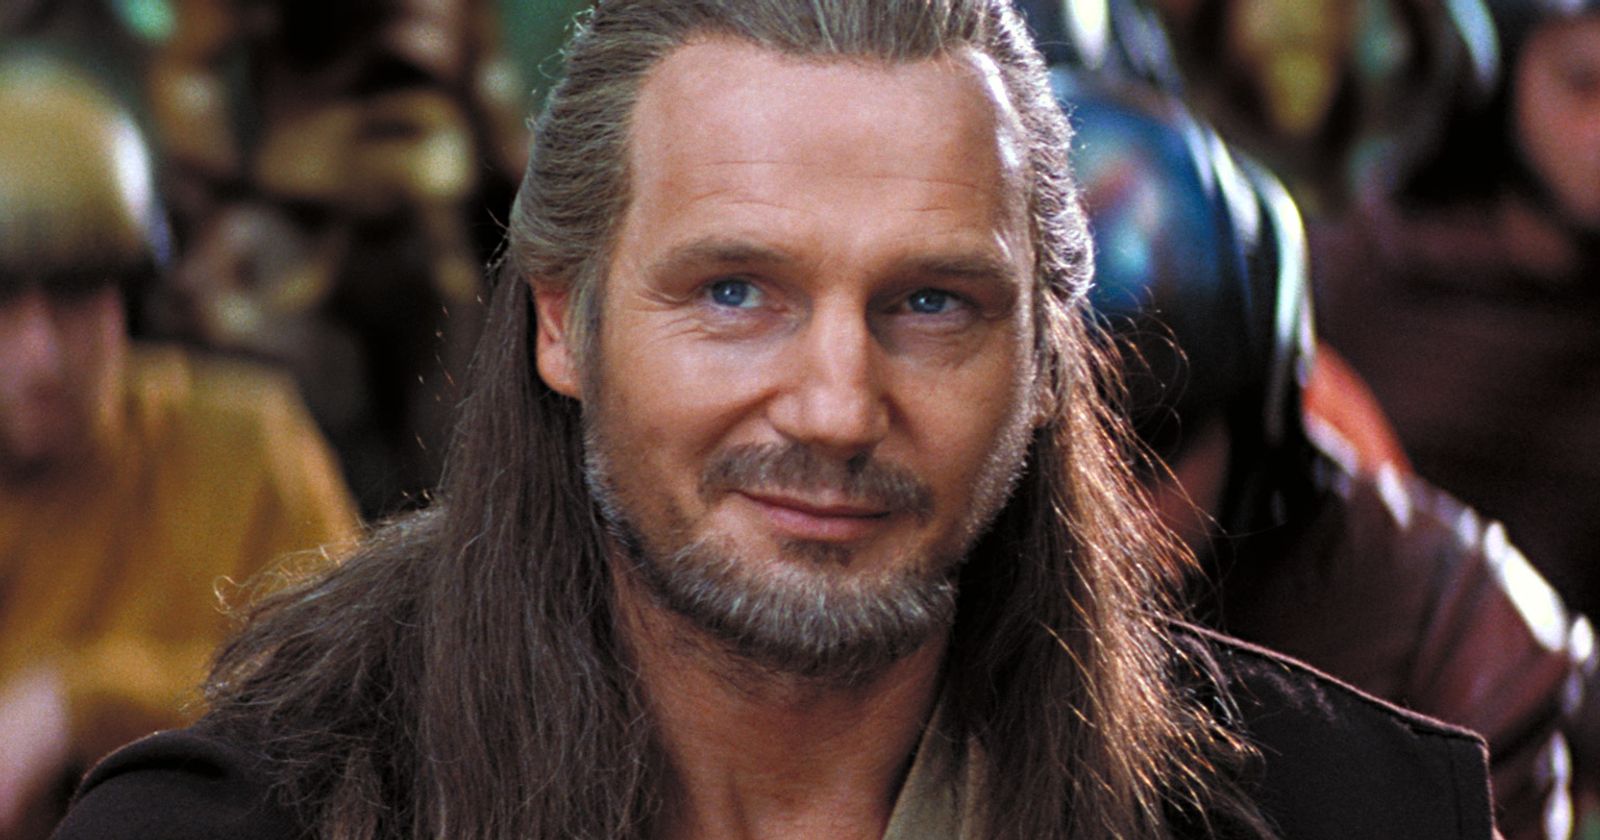 Liam Neeson on his long-awaited return to Star Wars: “I certainly didn't  want anyone else playing Qui-Gon Jinn” – Star Wars Thoughts